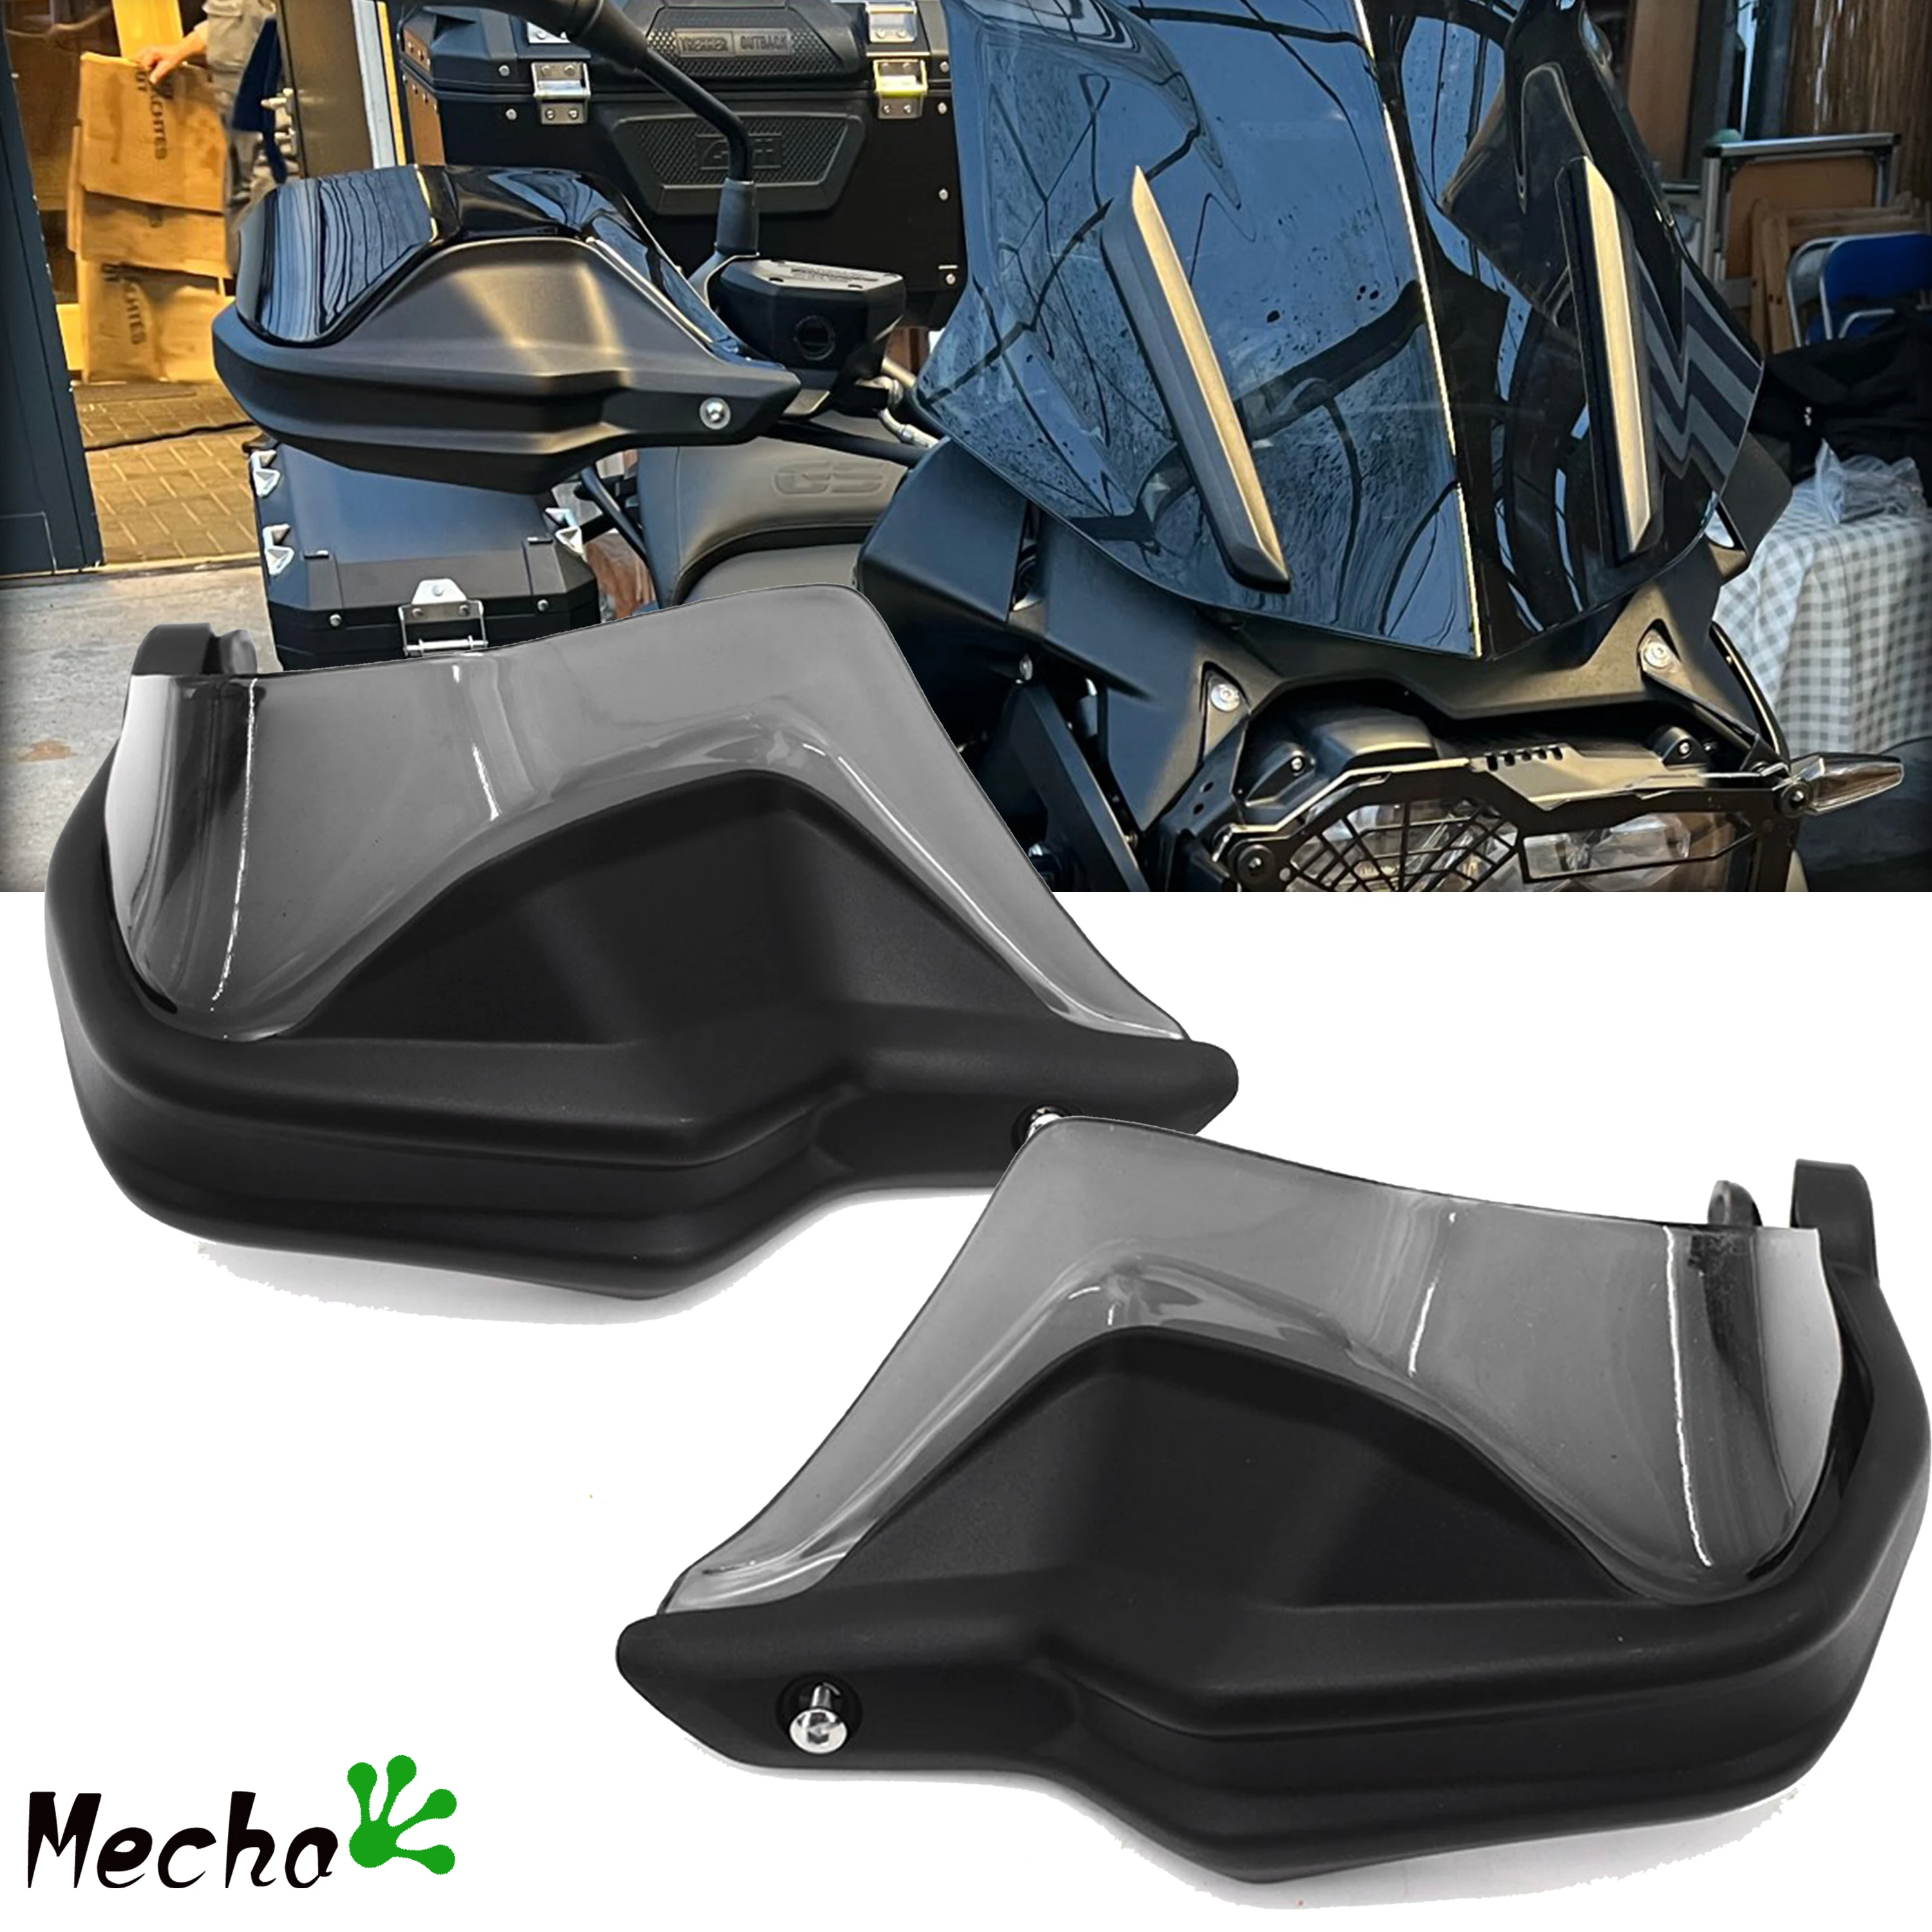 

Handguard Hand Shield Protector Windshield For BMW R 1200 GS ADV R1200GS LC R1250GS GSA F800GS Adventure S1000XR F750GS F850GS